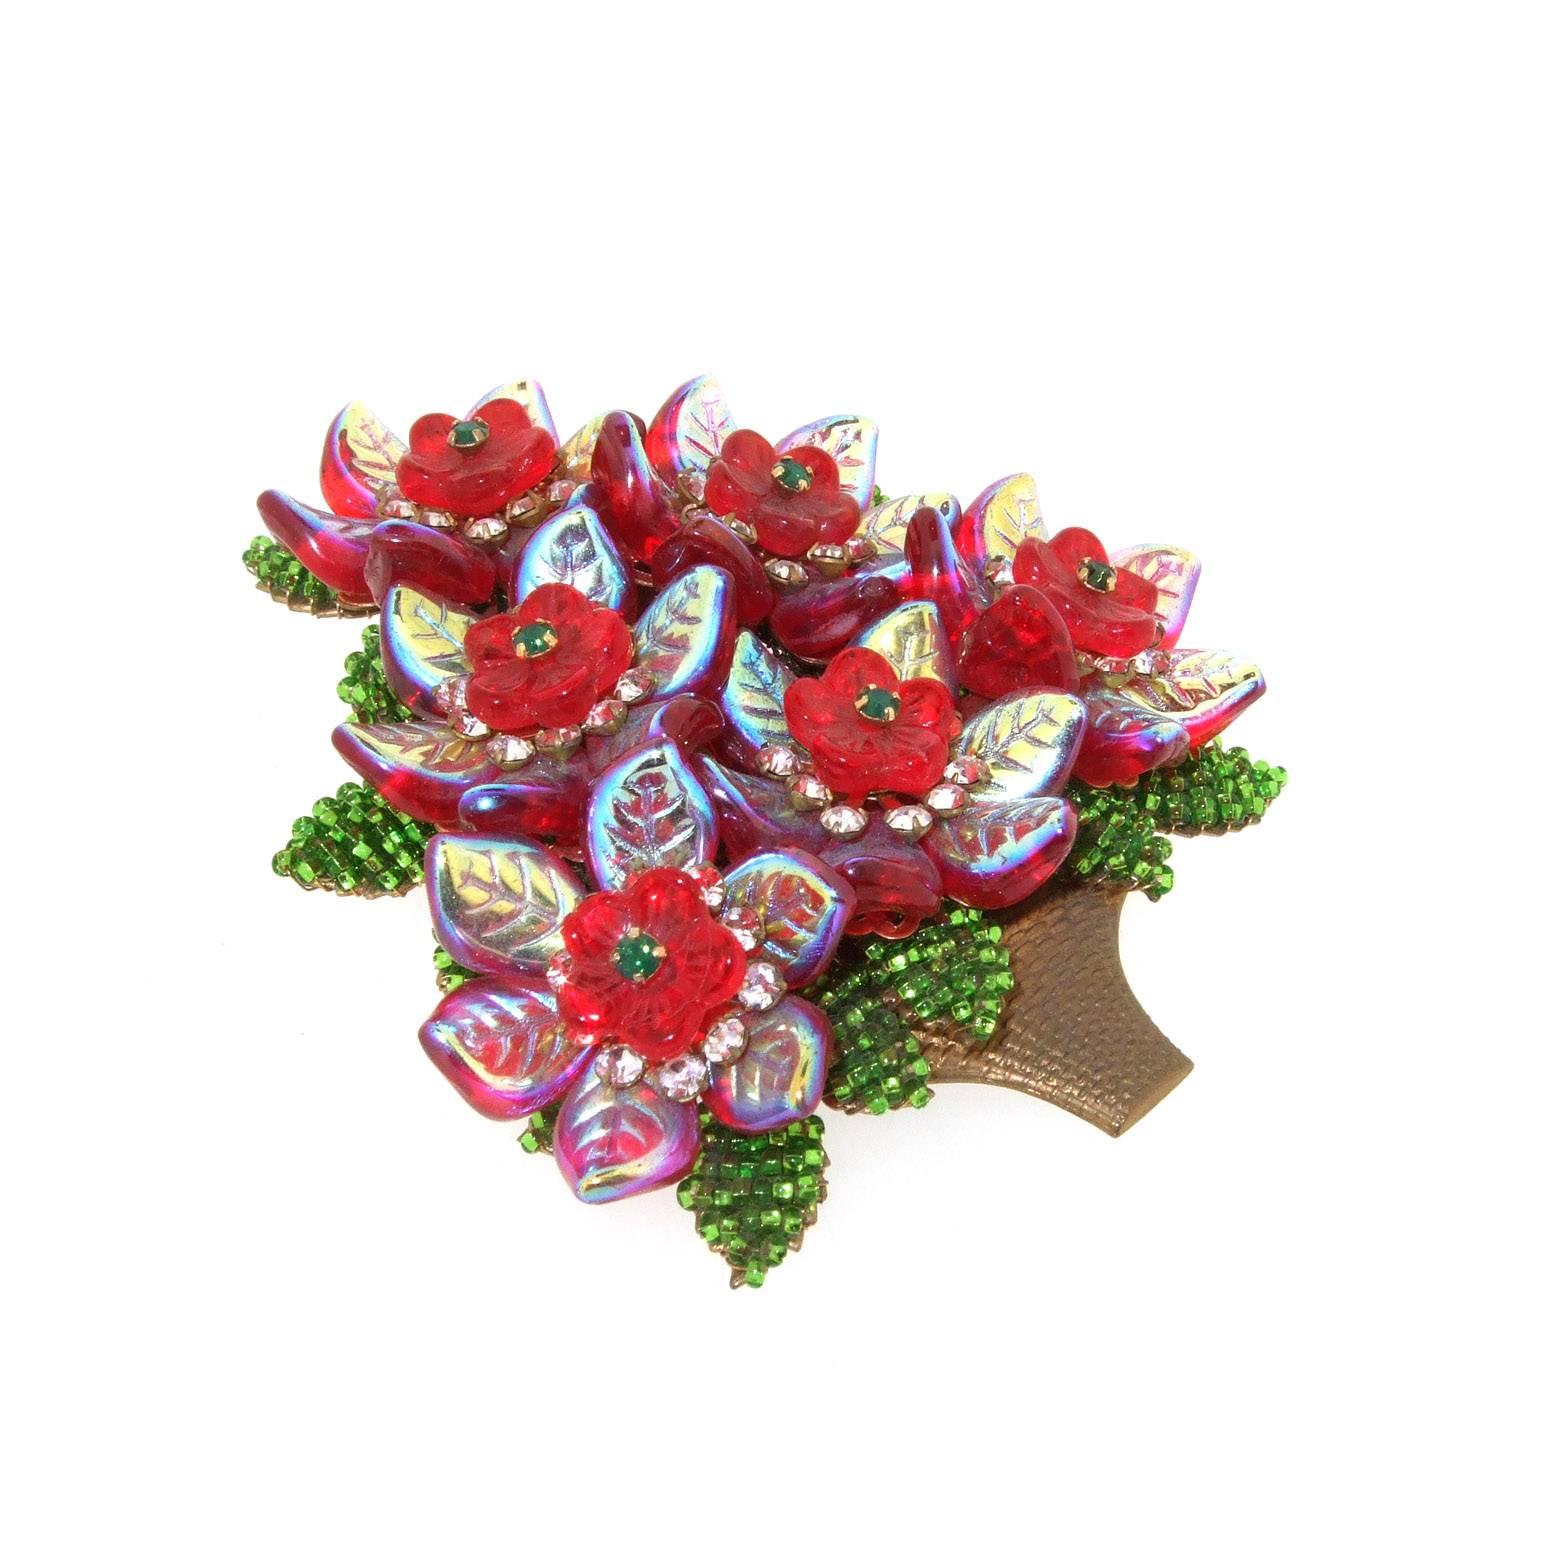 A large floral Christmas Tree brooch by Stanley Hagler, NYC. In gold brass metal hand beaded with vintage glass leaves and flowers.

It measures 8.4cm wide by 8.3 cm high.